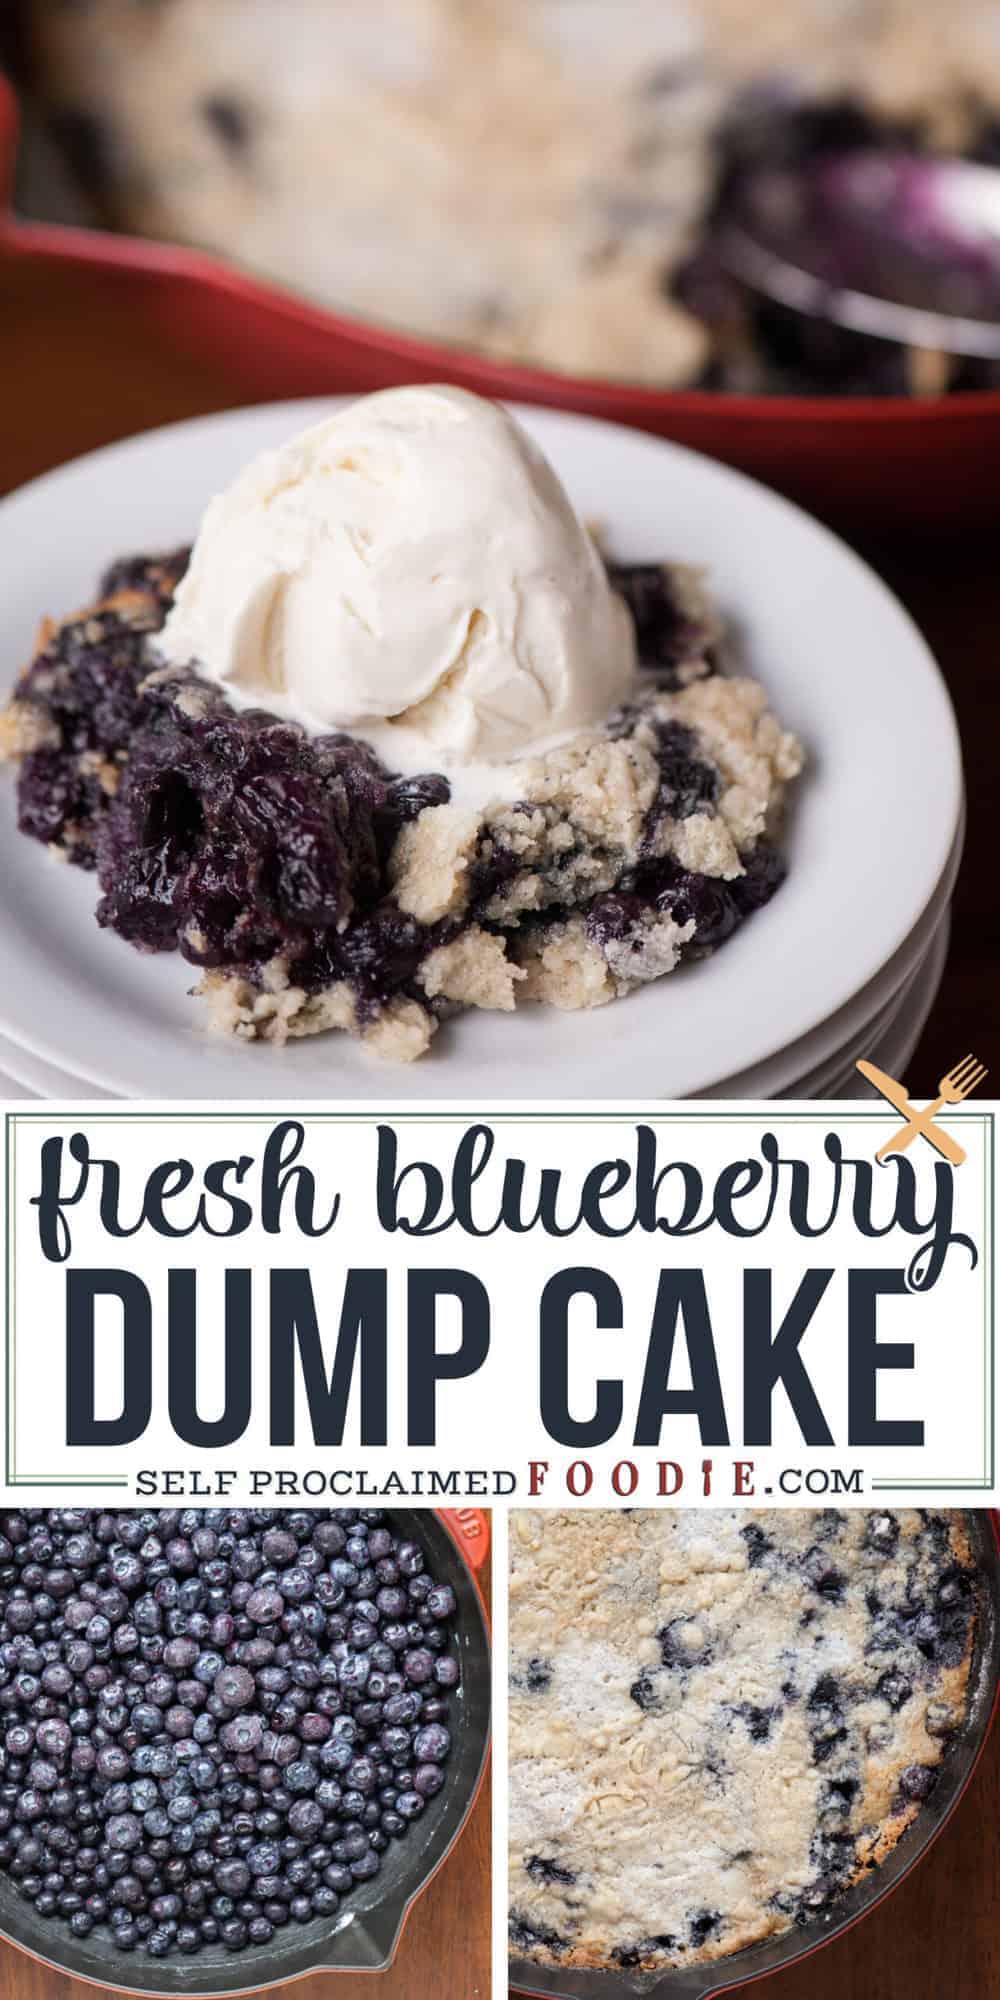 Easy Blueberry Dump Cake - Self Proclaimed Foodie